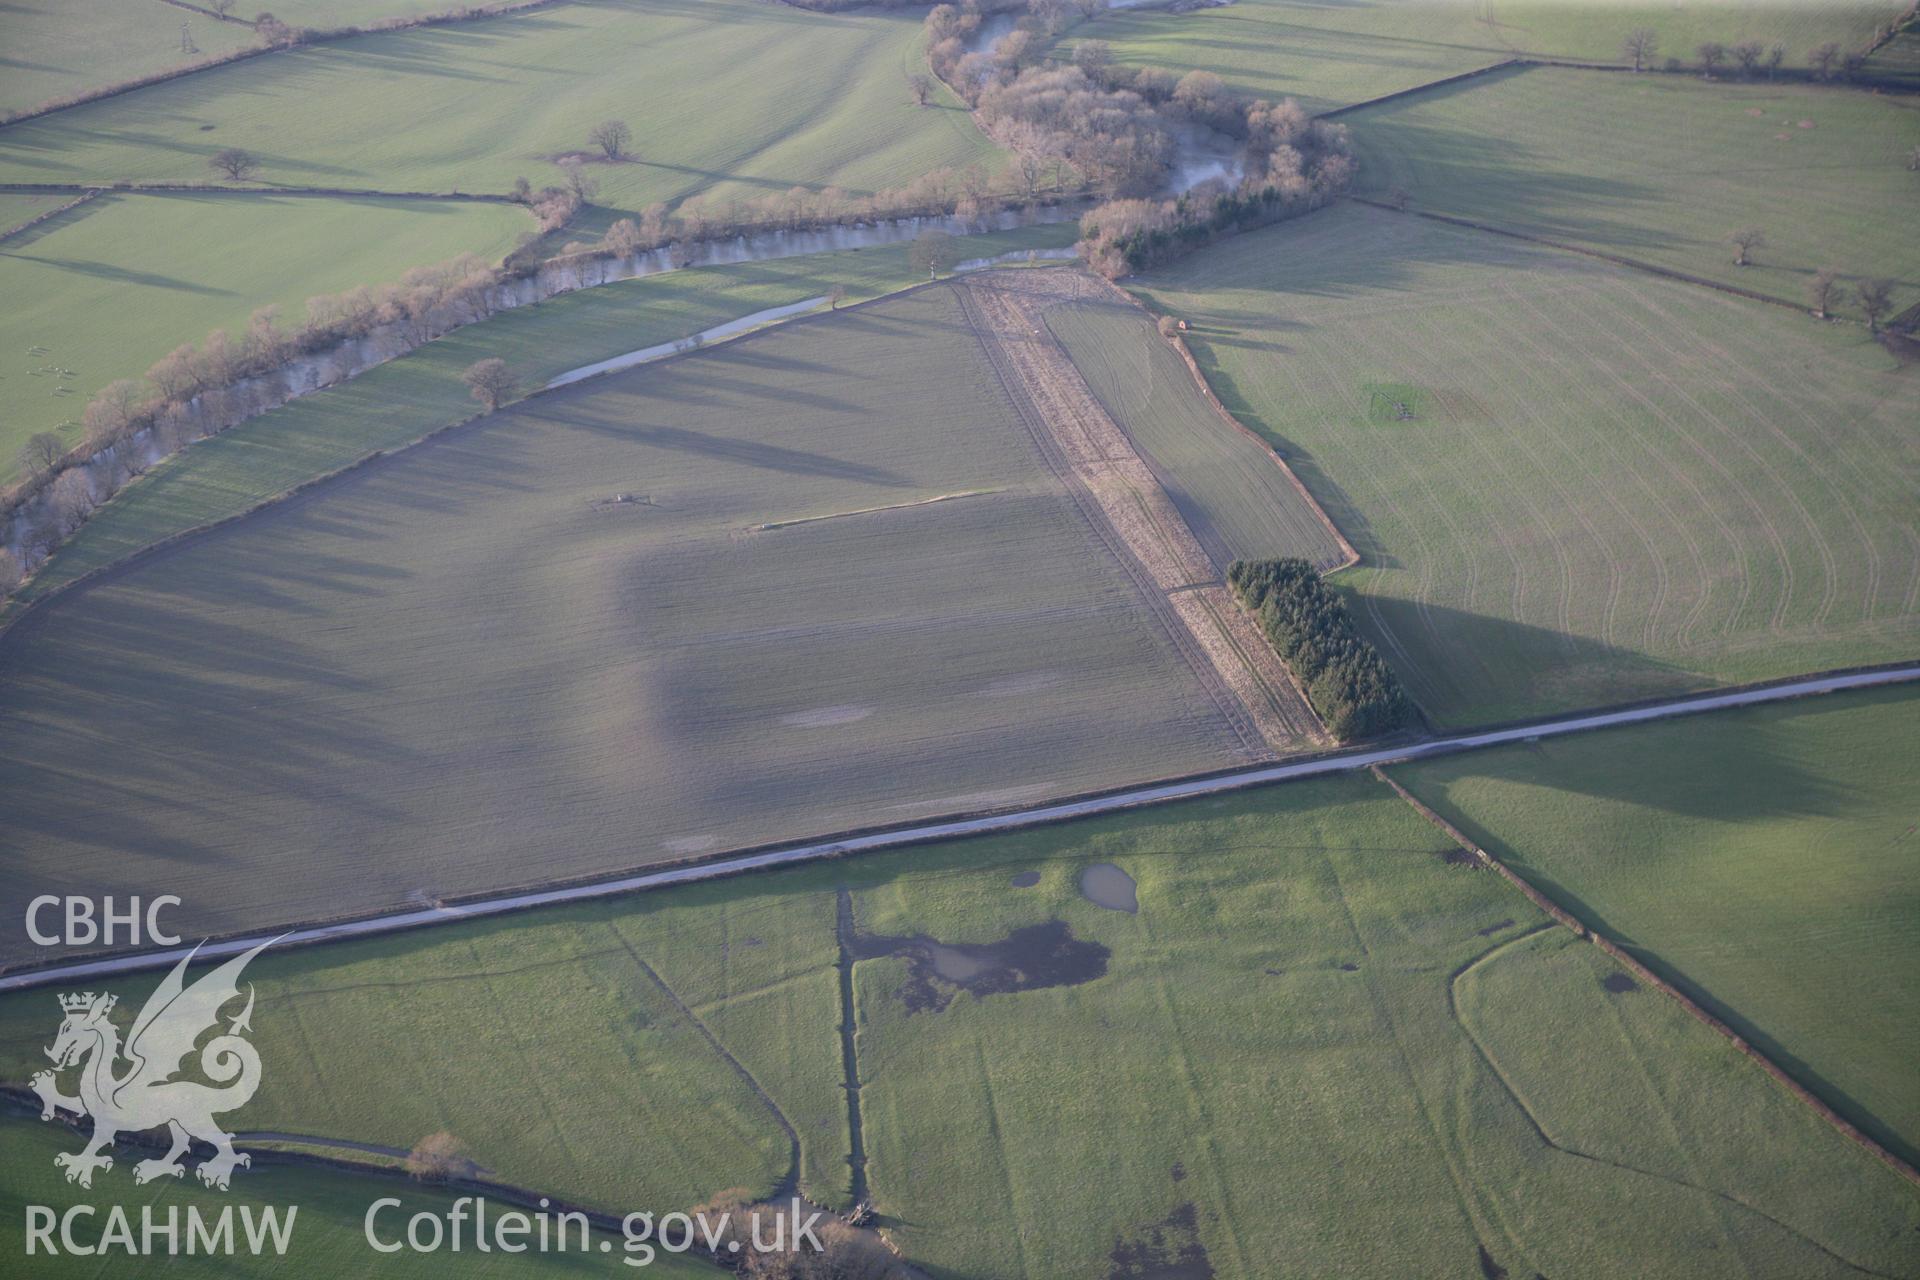 RCAHMW colour oblique photograph of Forden Gaer Roman Fort. Taken by Toby Driver on 08/02/2011.